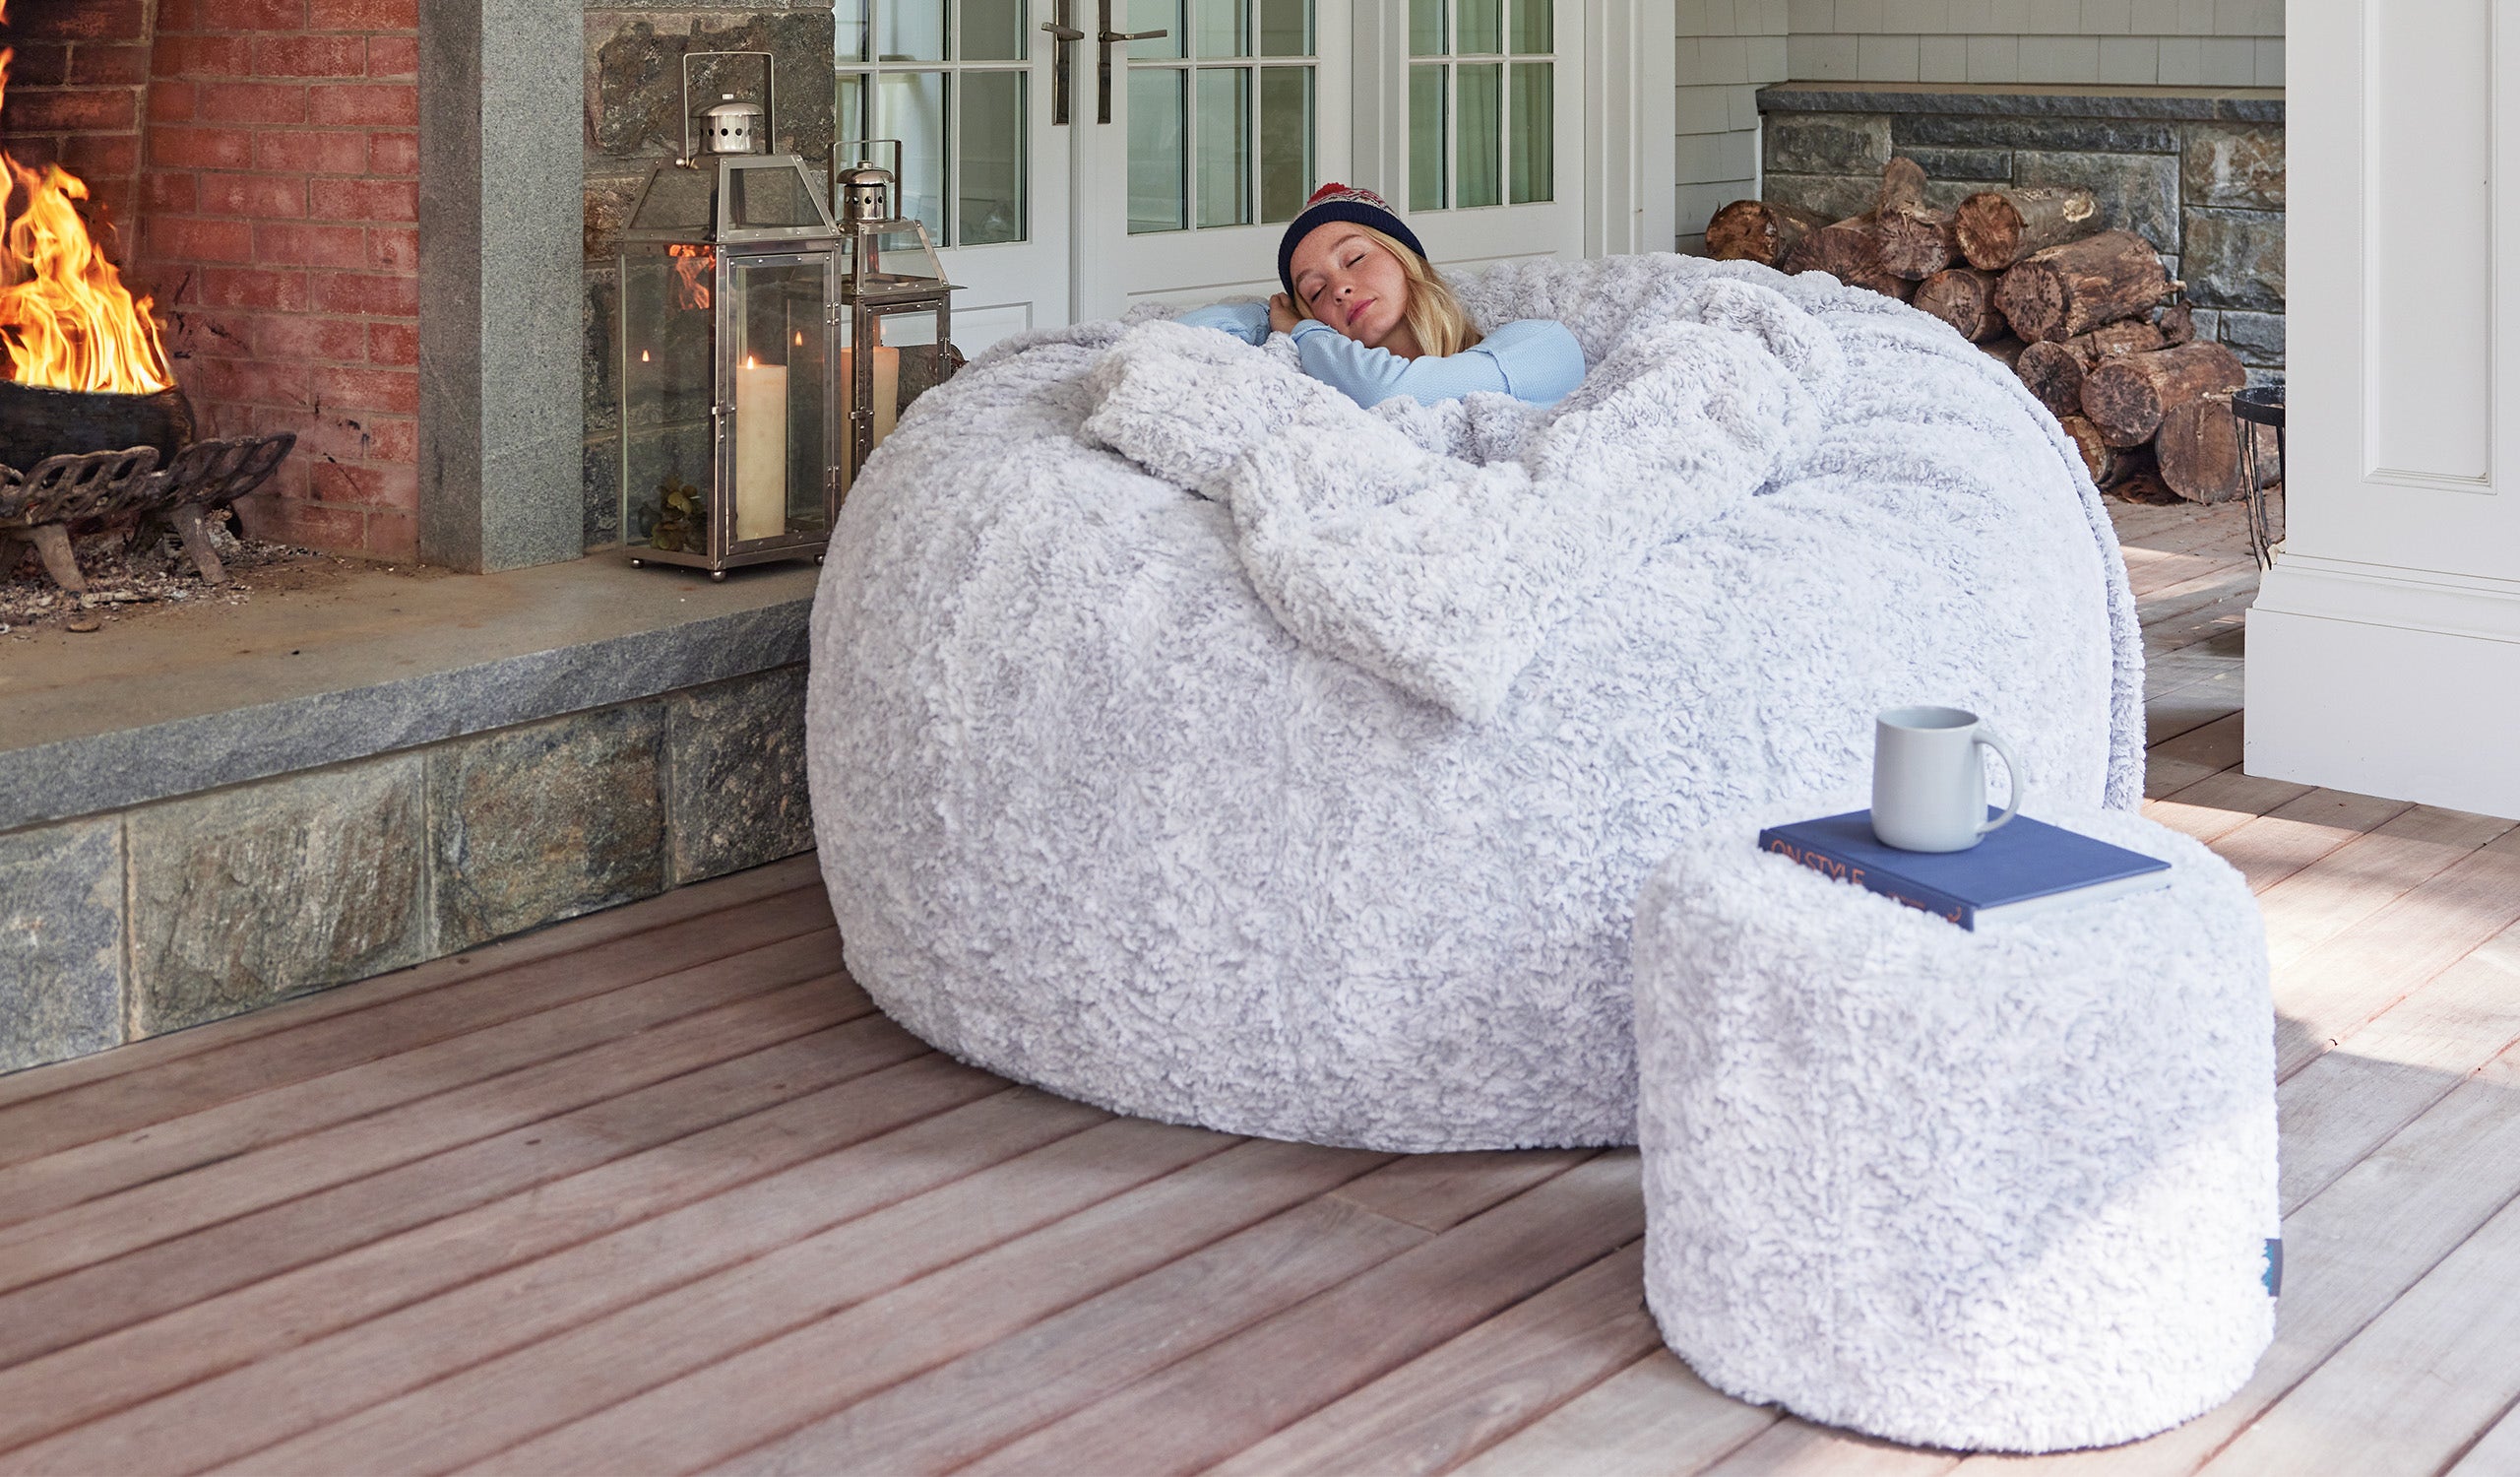 A person relaxing on a large, grey beanbag with a white blanket.